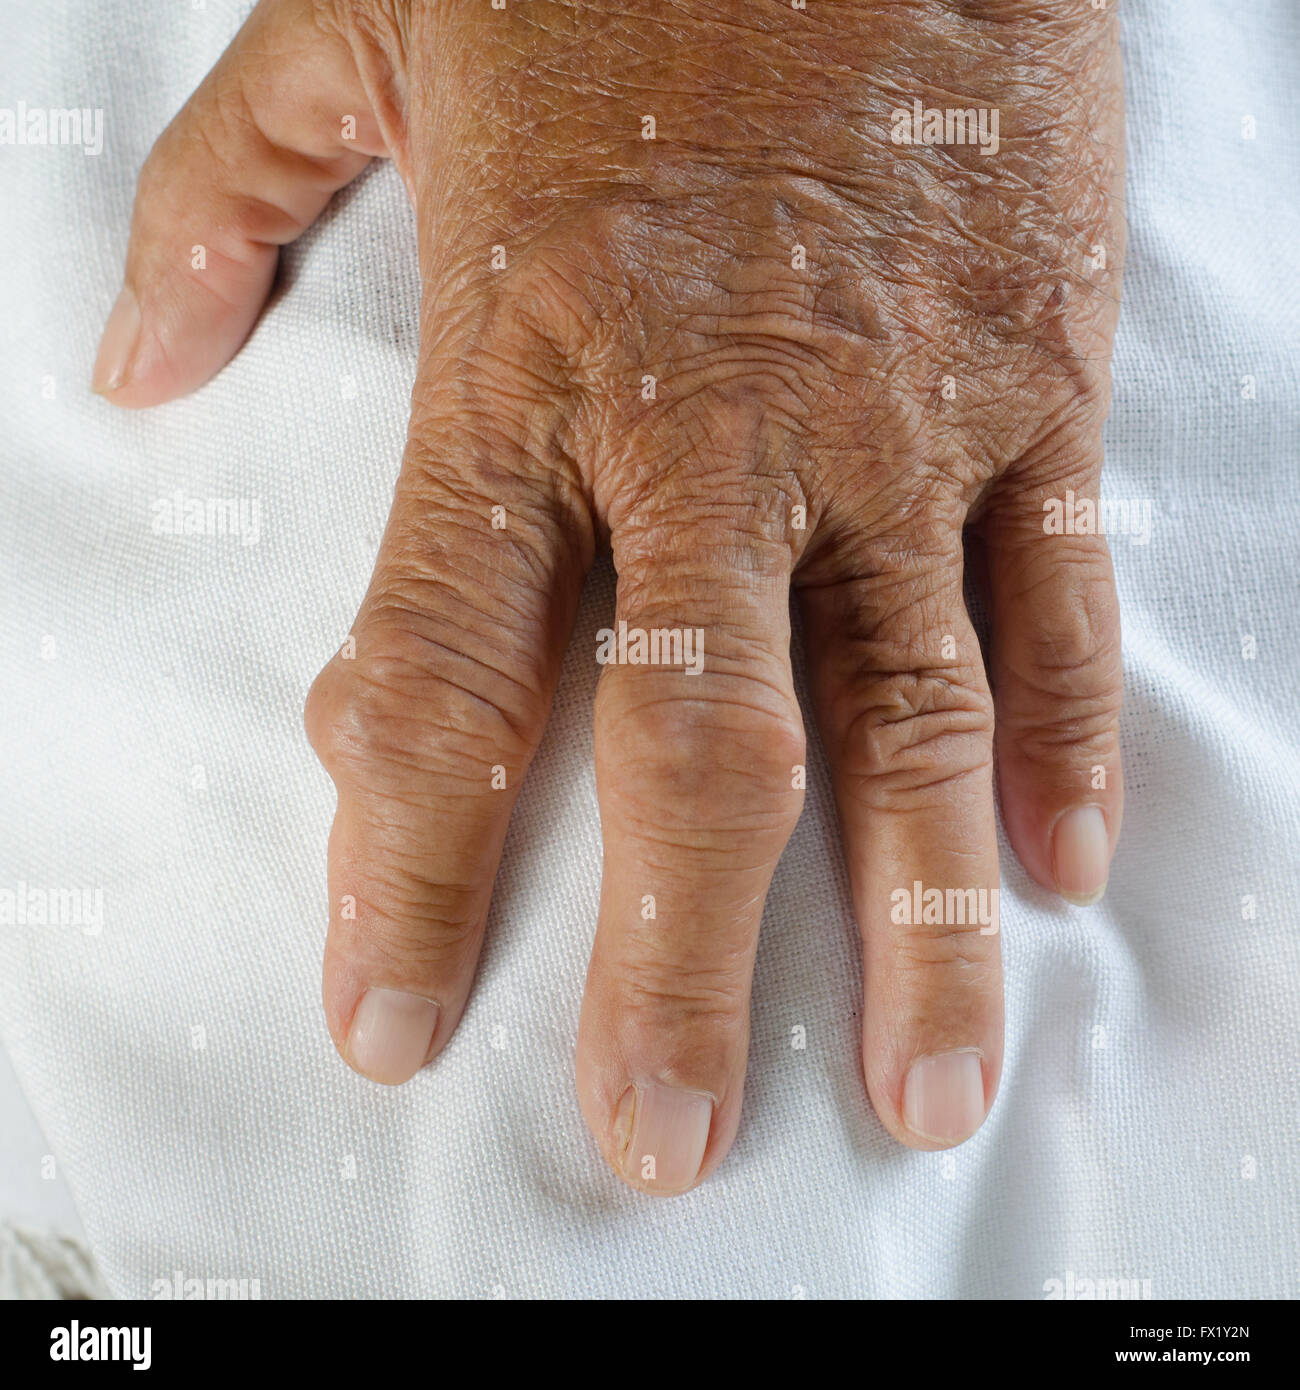 Fingers of patients with gout. Stock Photo